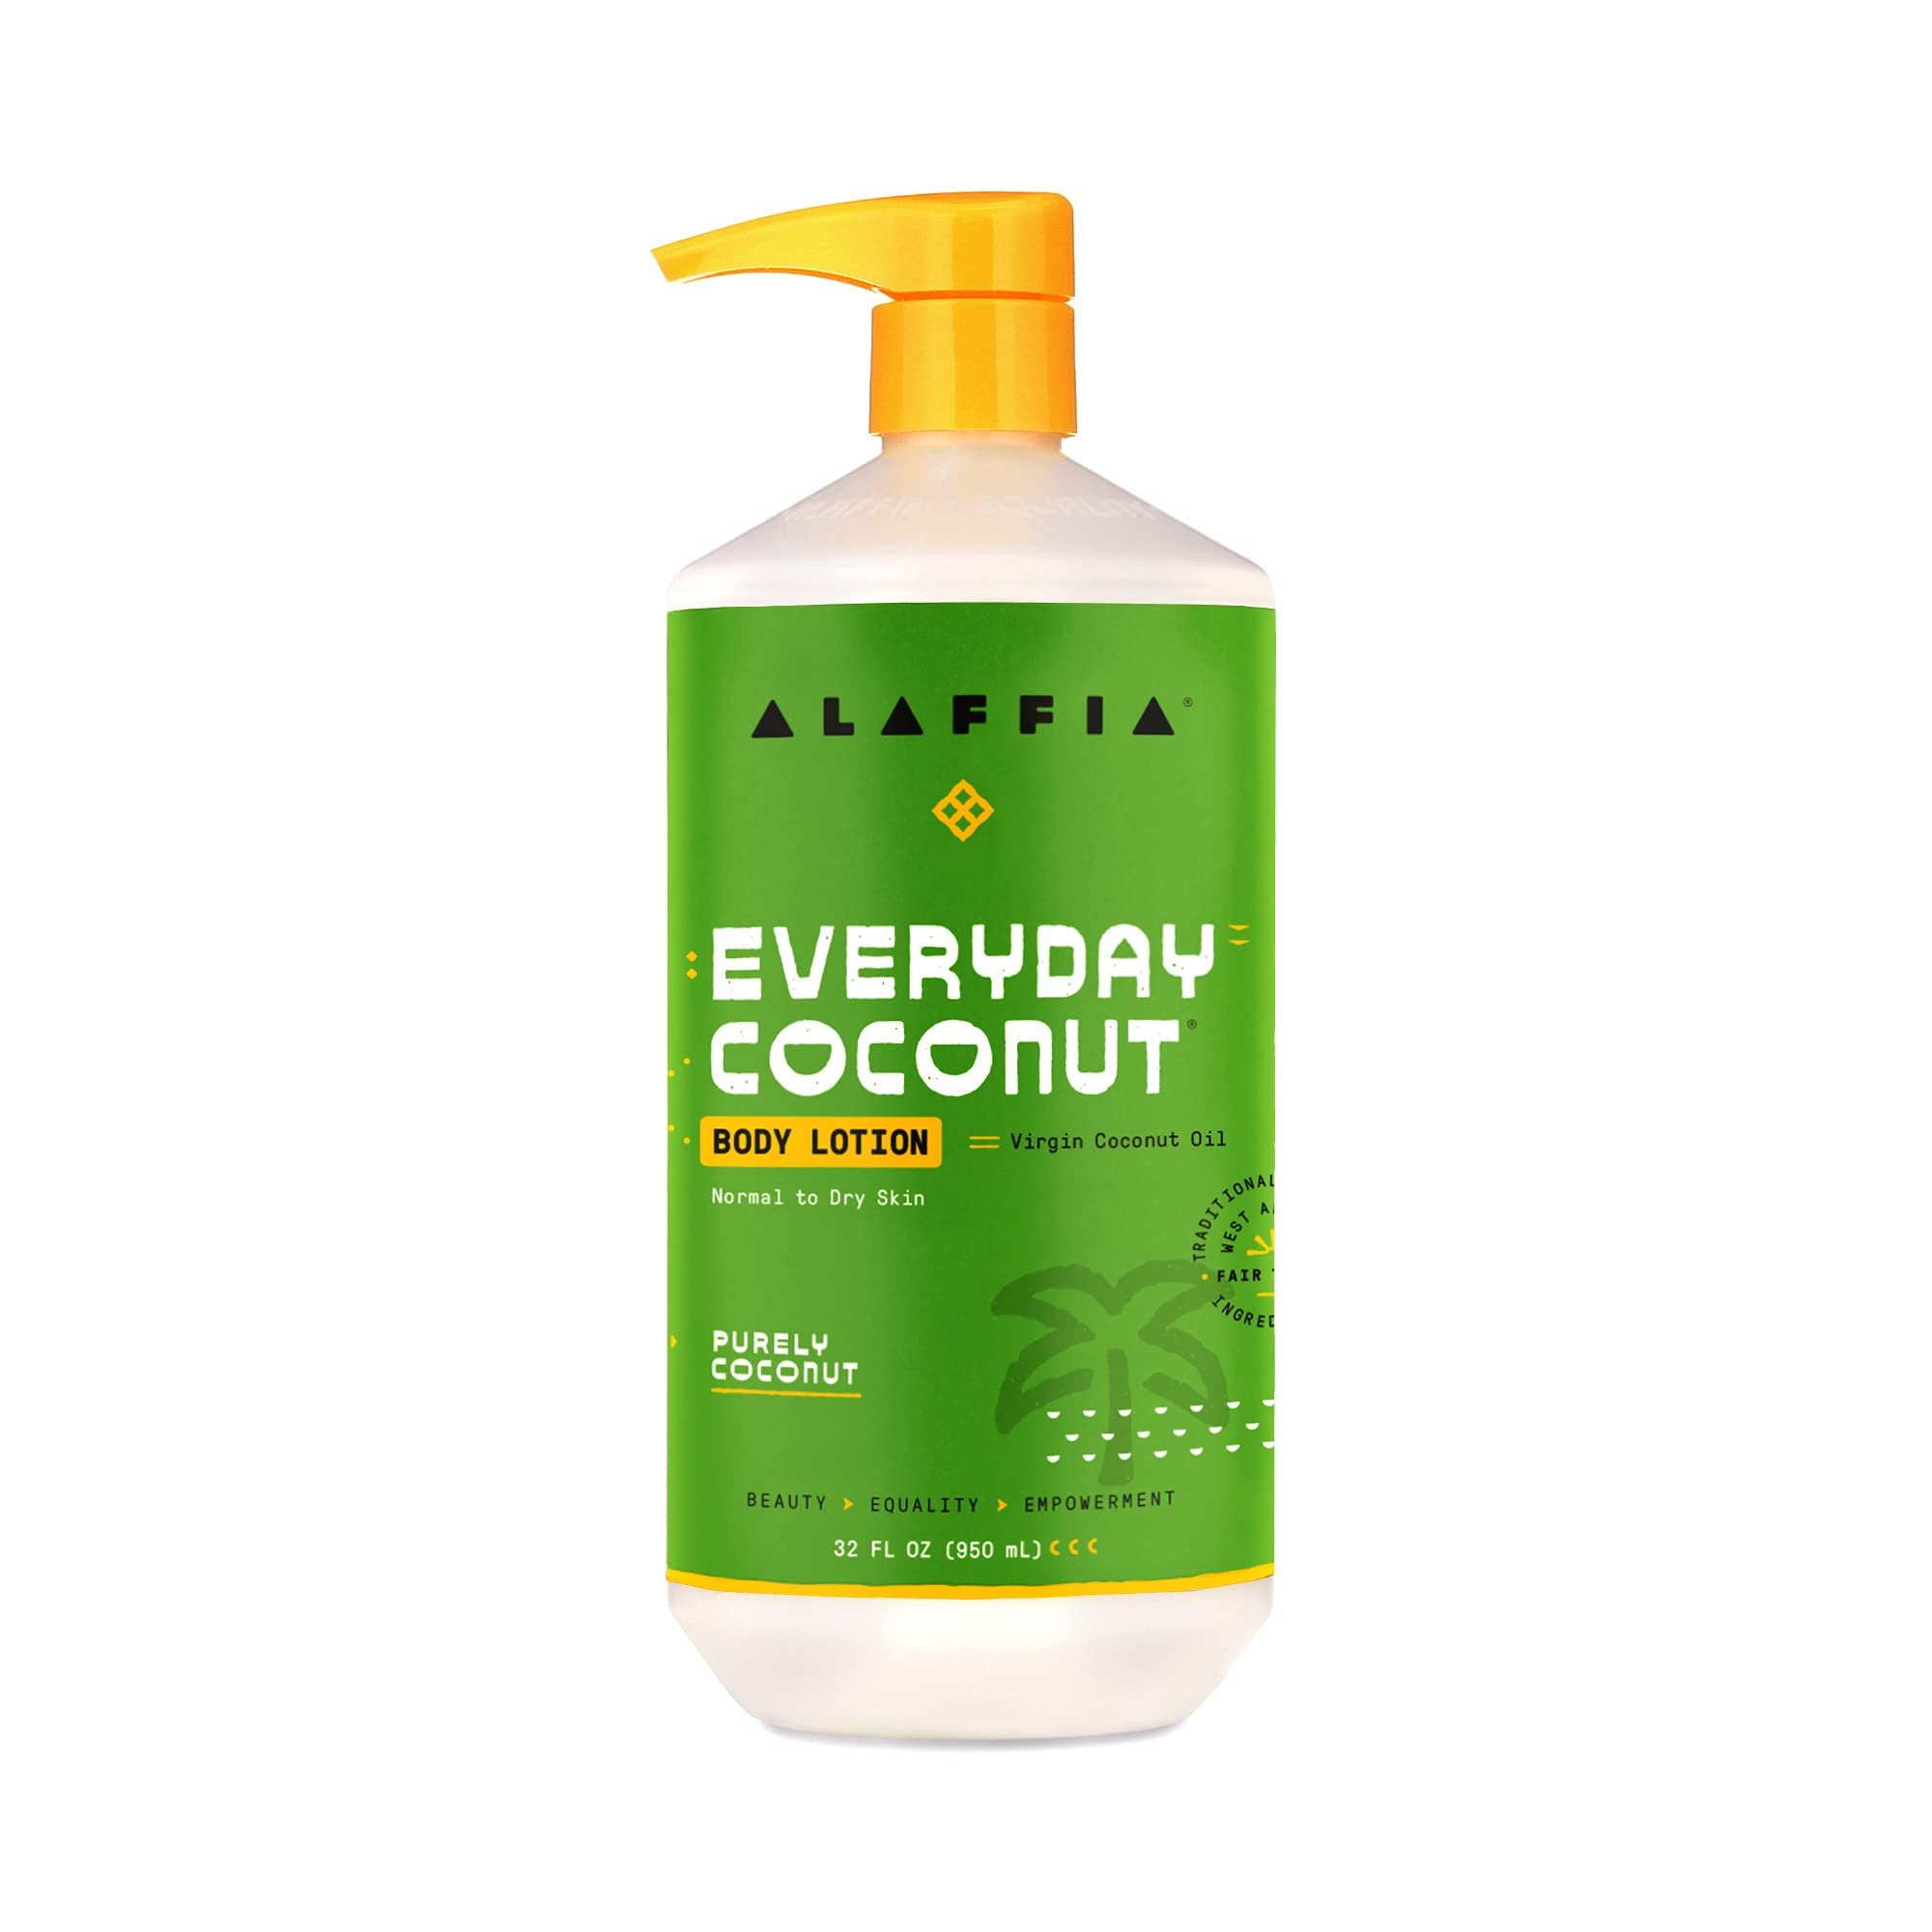 Alaffia EveryDay Coconut Hydrating Body Lotion, Normal to Dry Skin, Moisturizing Support for Soft & Supple Skin, Purely Coconut, 32 Fl Oz